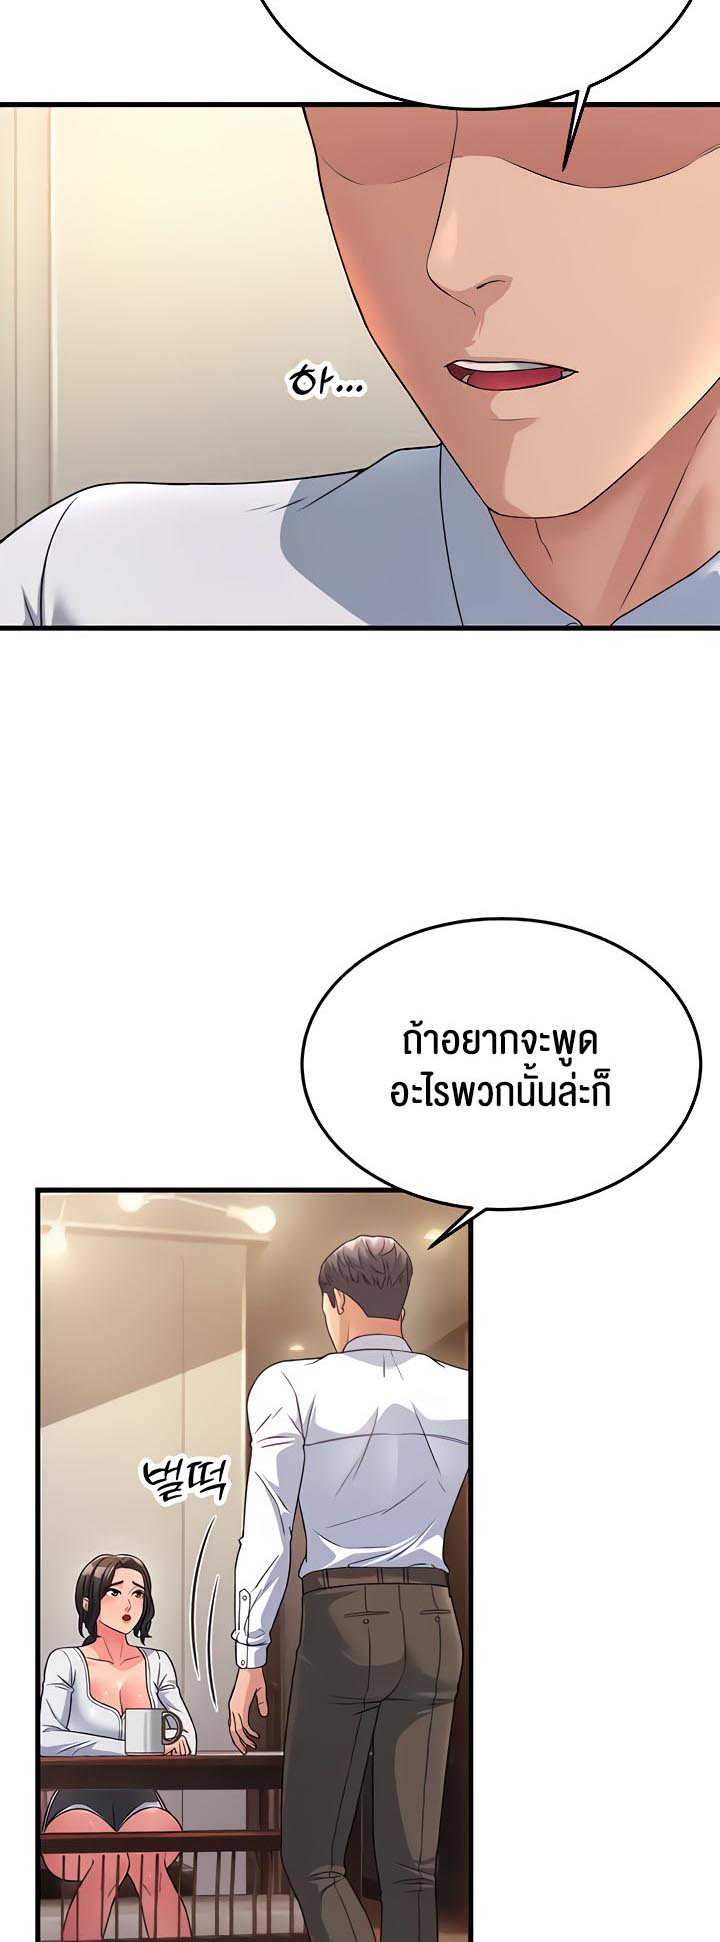 à¸­à¹ˆà¸²à¸™à¹‚à¸”à¸ˆà¸´à¸™ à¹€à¸£à¸·à¹ˆà¸­à¸‡ Mother in Law Bends To My Will 11 18